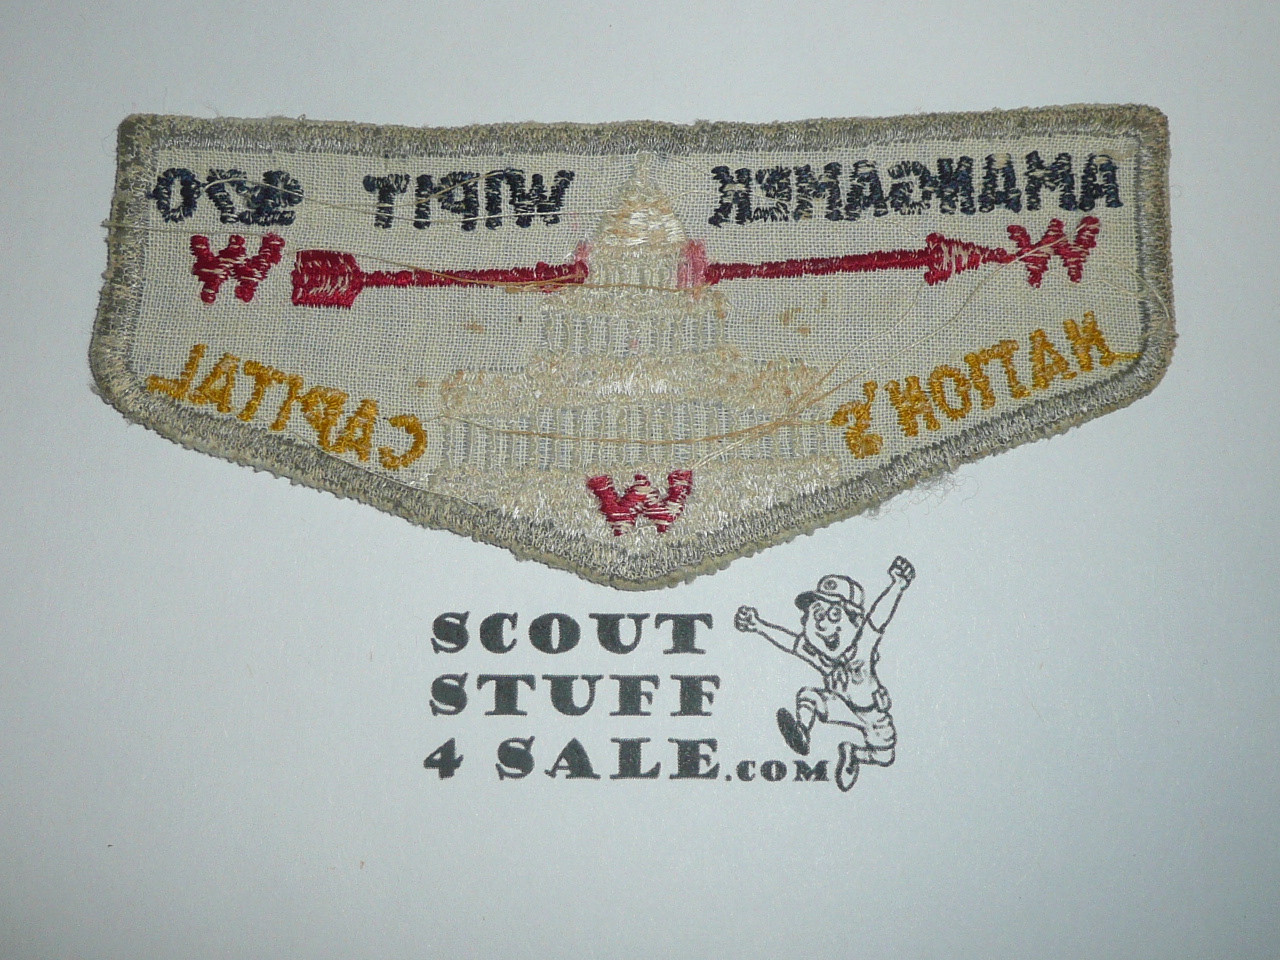 Order of the Arrow Lodge #470 Amangamek-Wipit f1 First Flap Patch